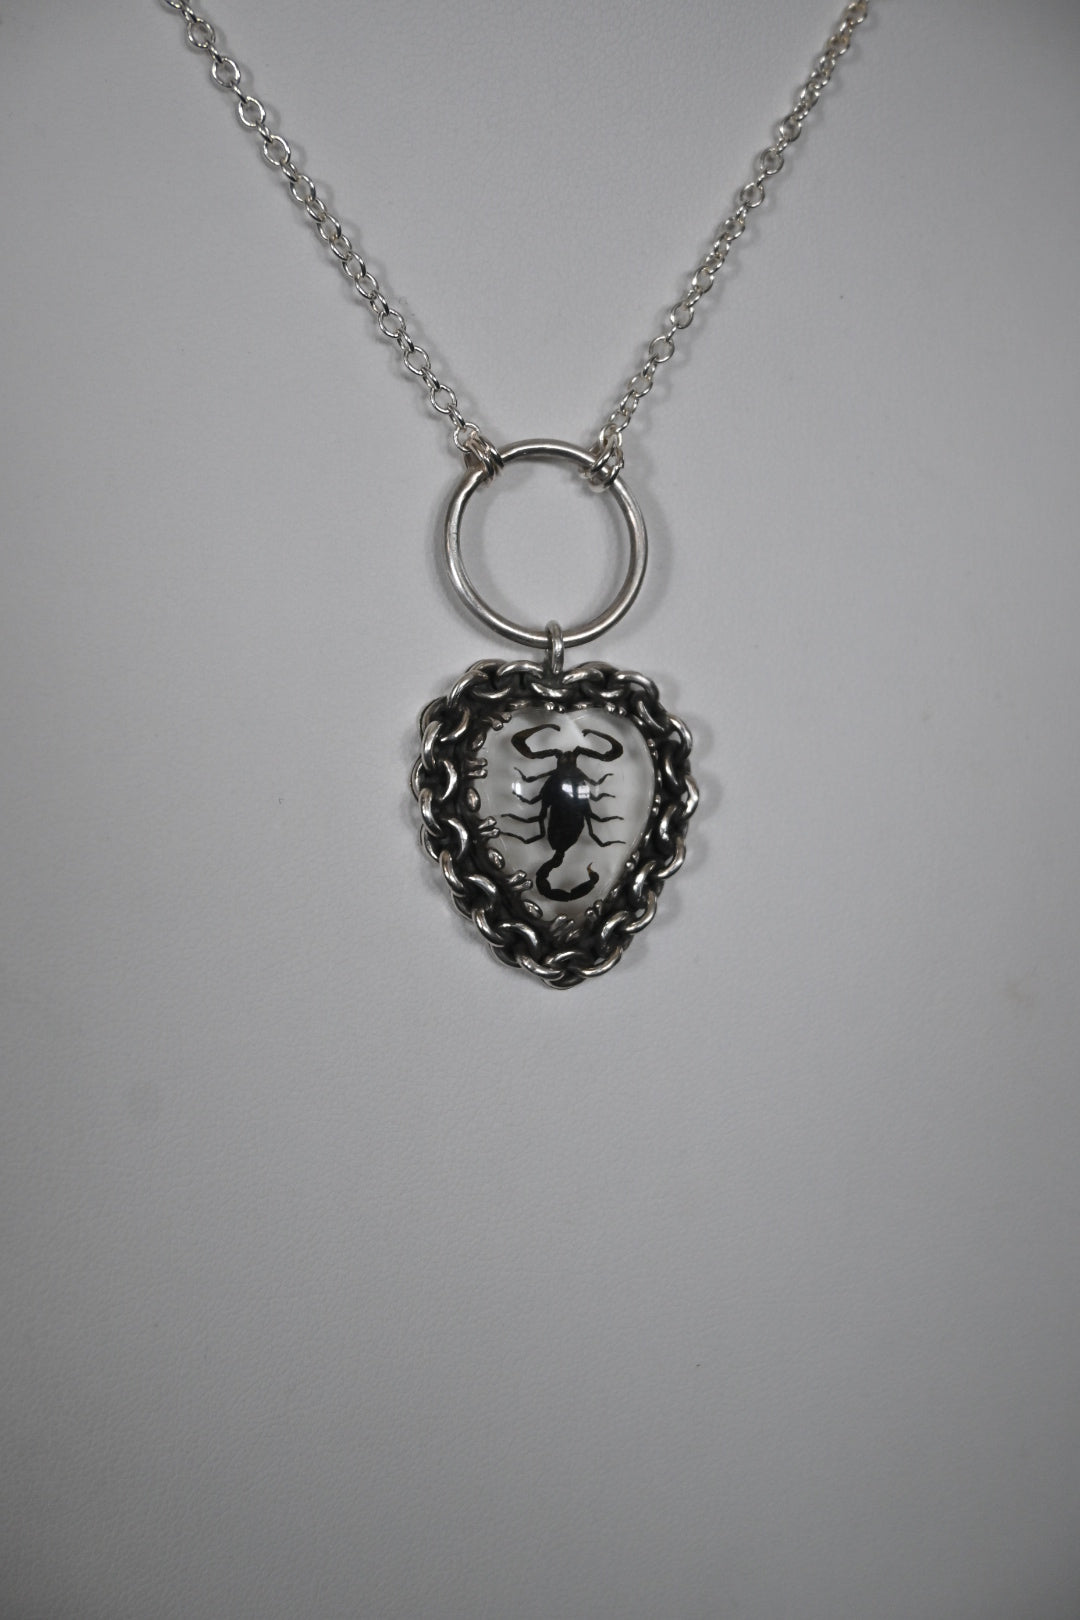 Scorpion Heart 'o-ring' Necklace